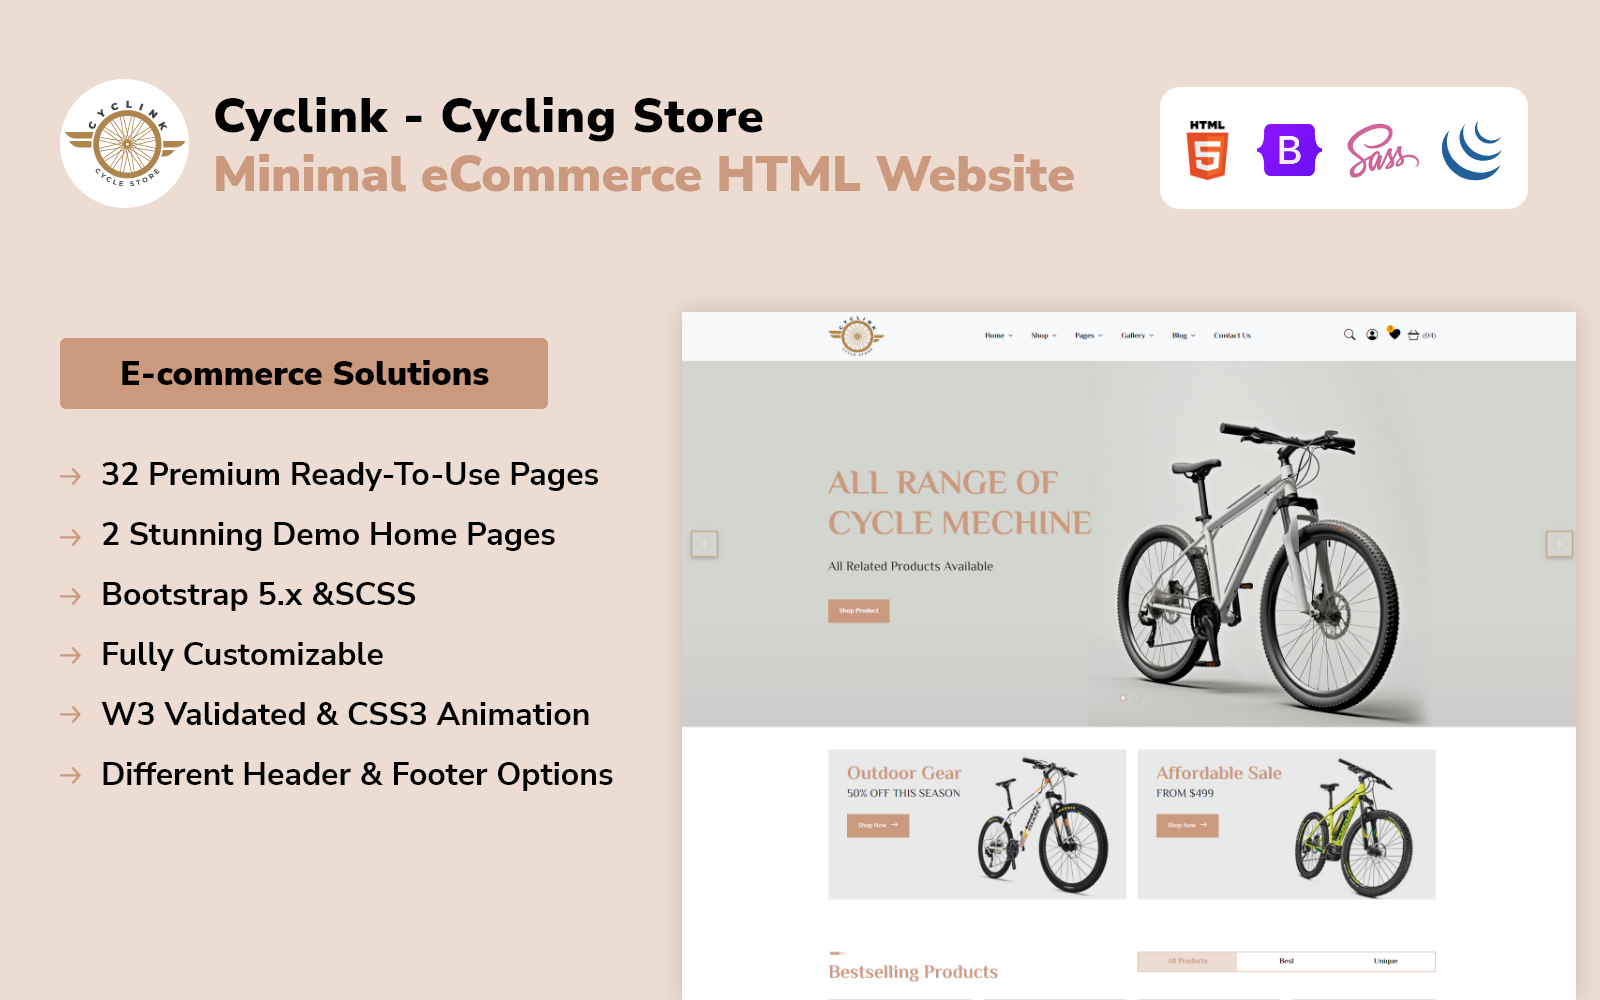 Cyclink - Cycling Store Minimal eCommerce HTML Website